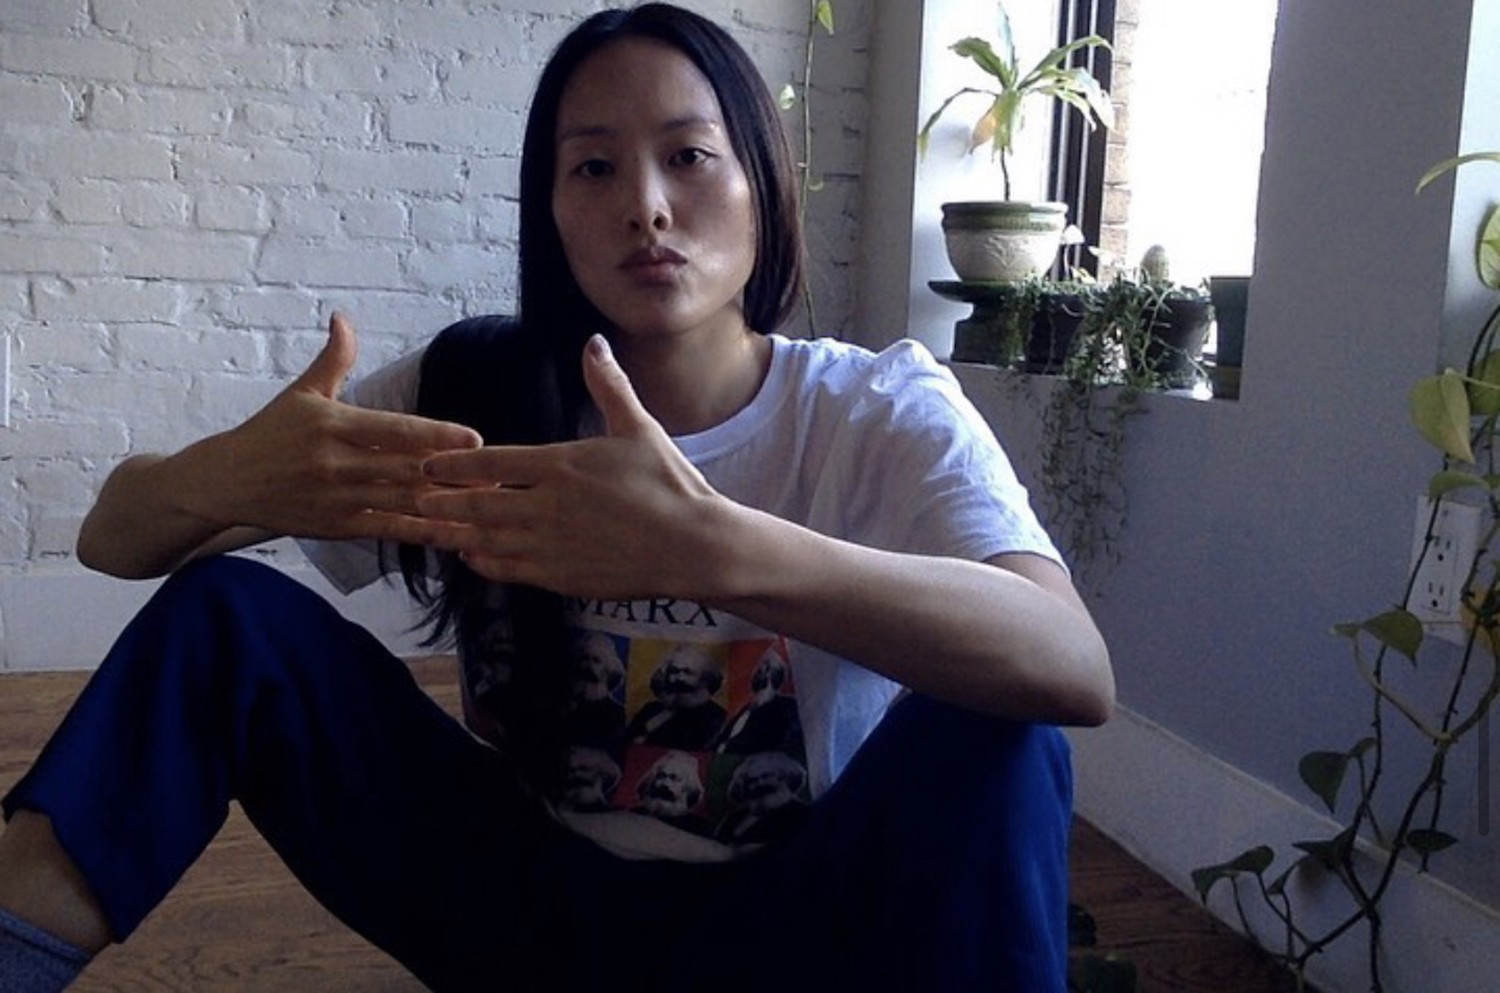 An Asian woman with long hair, arms raised making a gesture with her hands of convergence, and a white t-shirt with replicated images of Karl Marx sits on a wooden floor in front of a white brick wall and some plants on a windowsill.